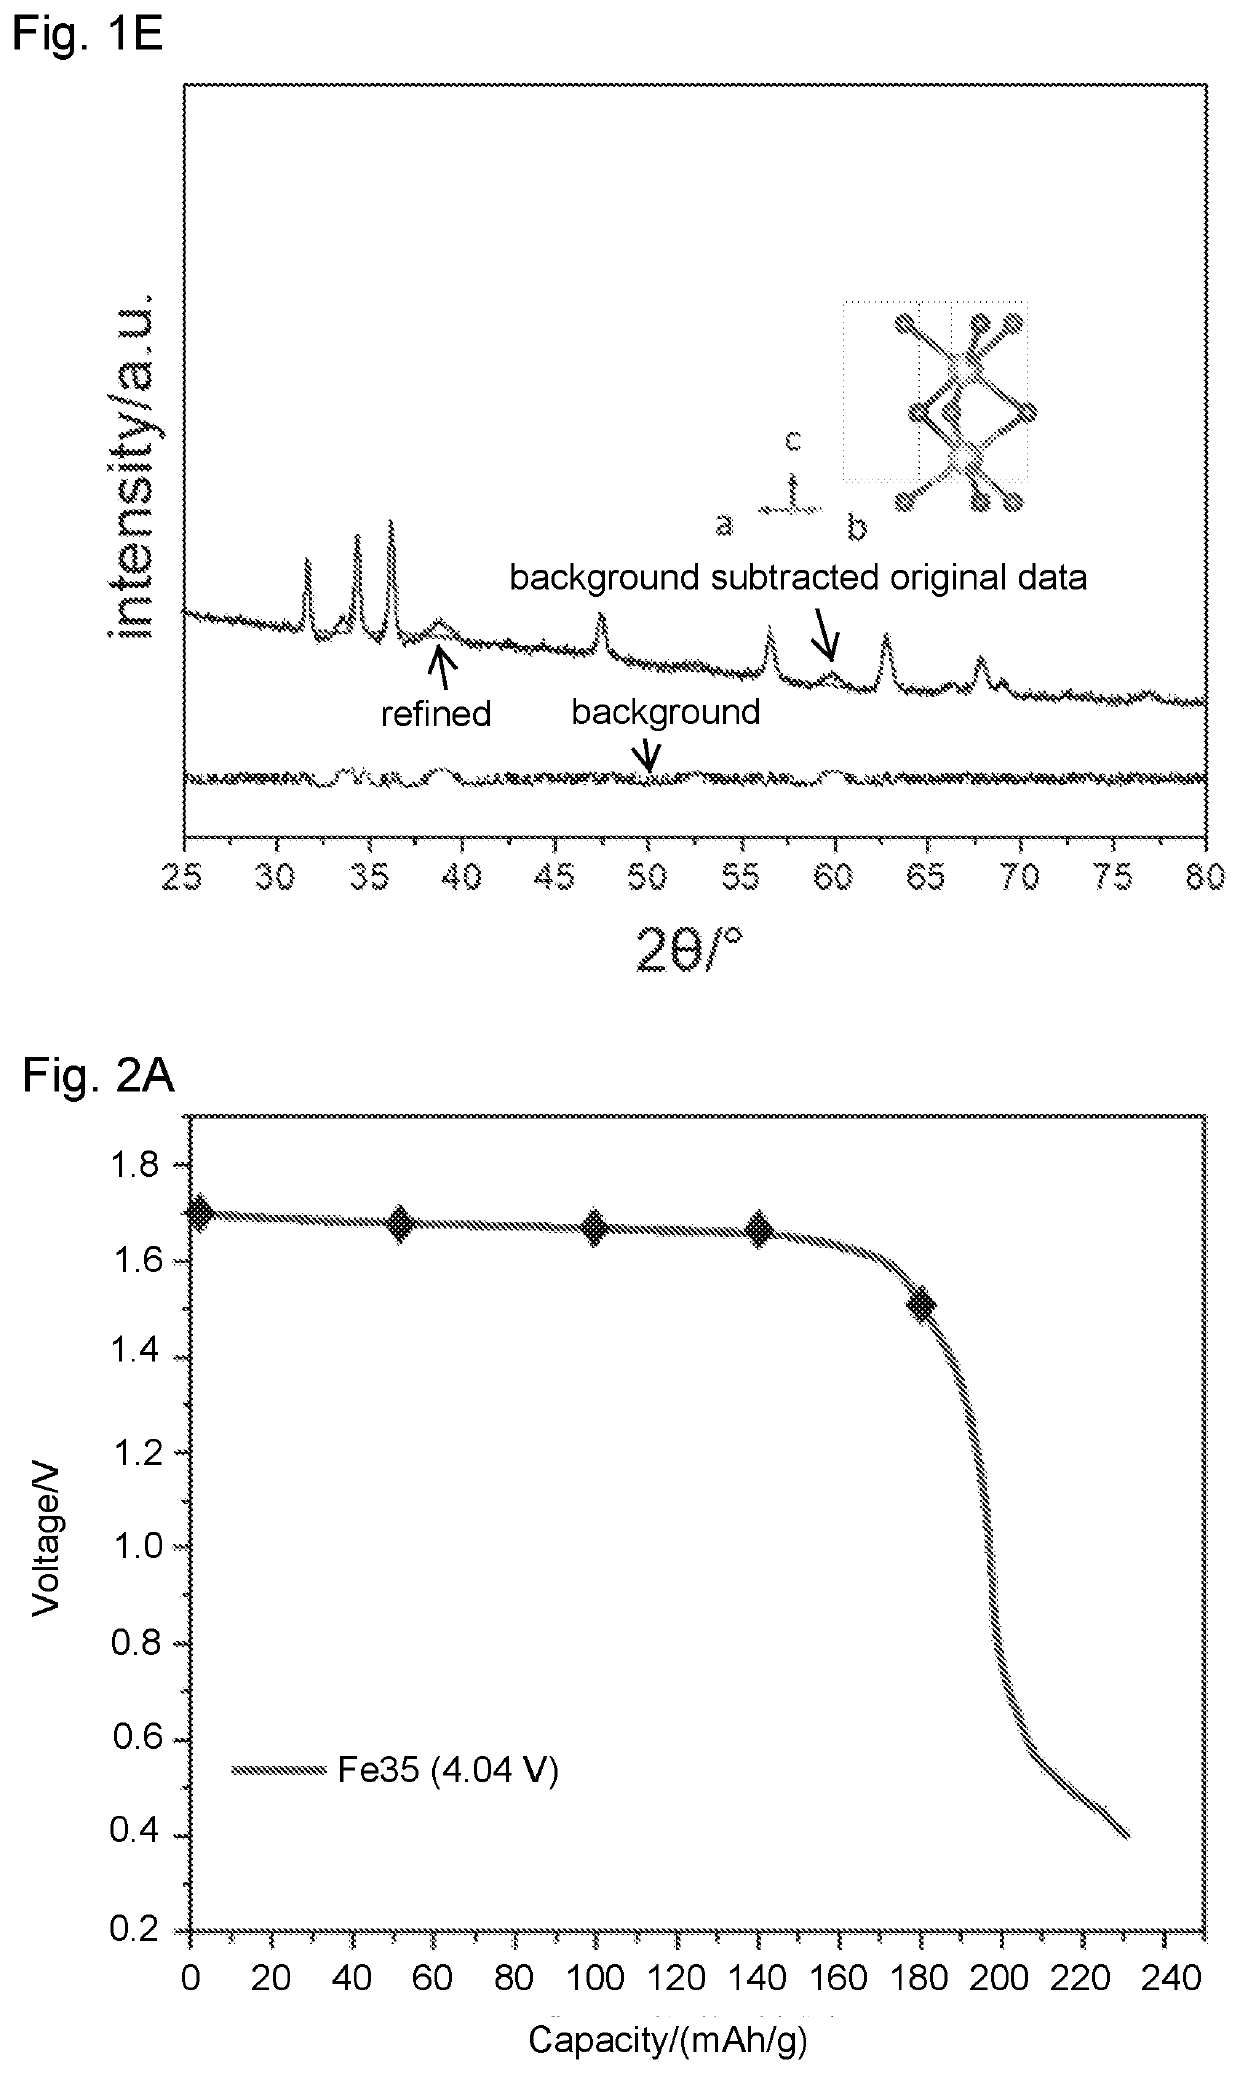 Desodiated sodium transition metal oxides for primary batteries